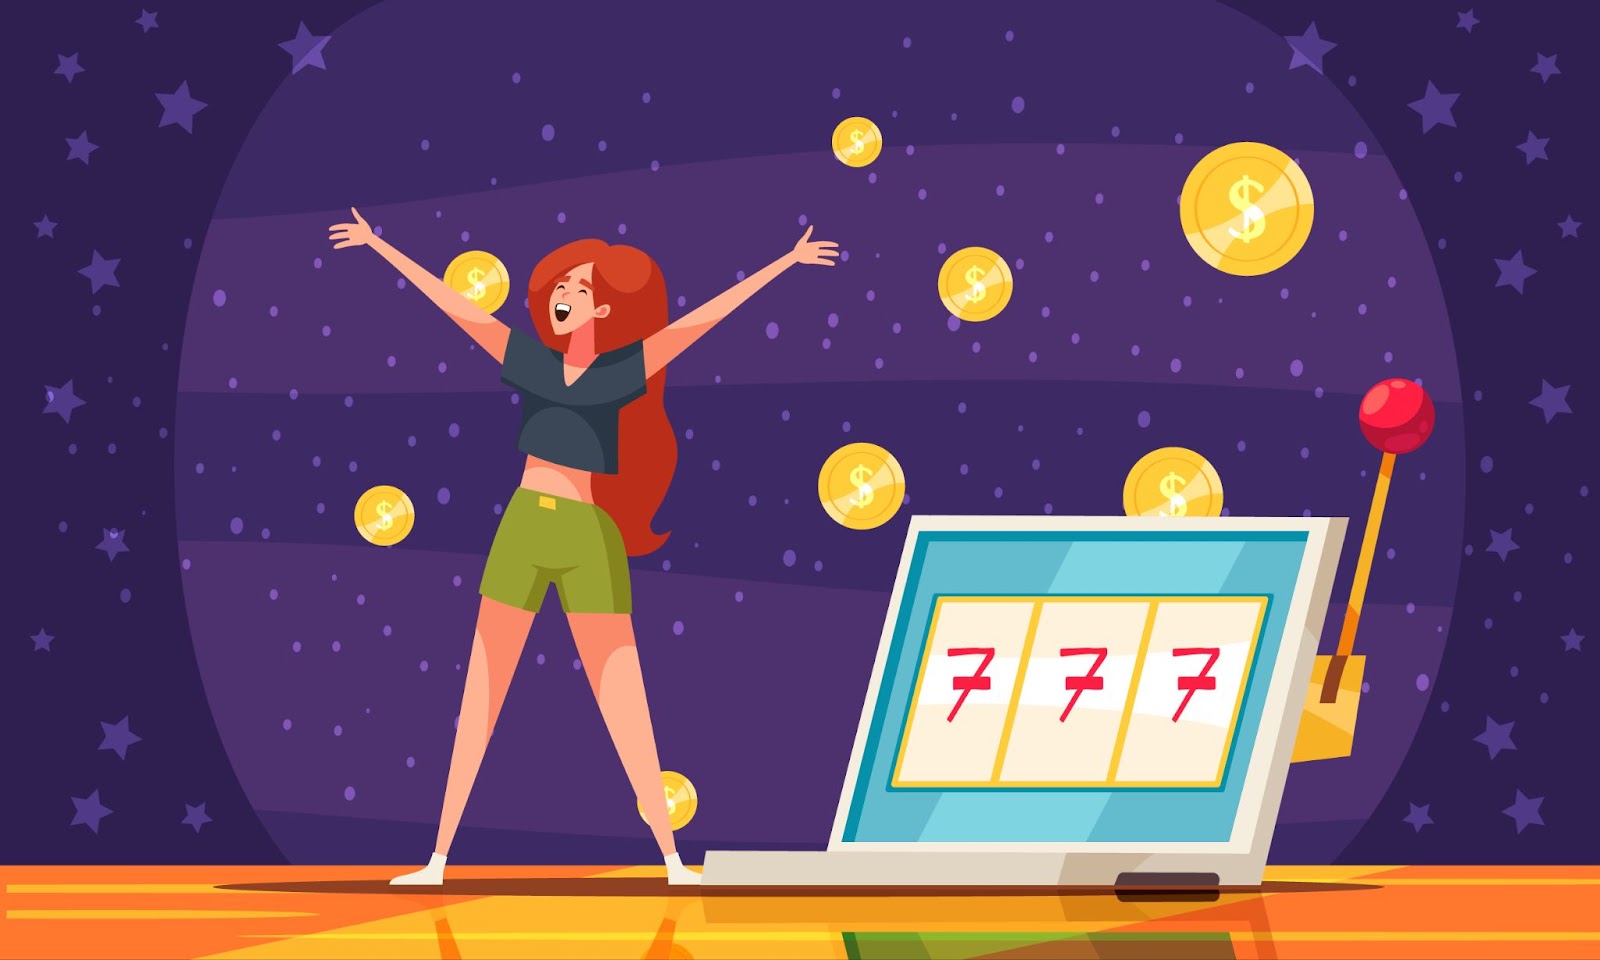 Illustration of a joyful woman with arms raised, surrounded by coins, celebrating in front of a laptop displaying a winning slot machine with triple sevens.